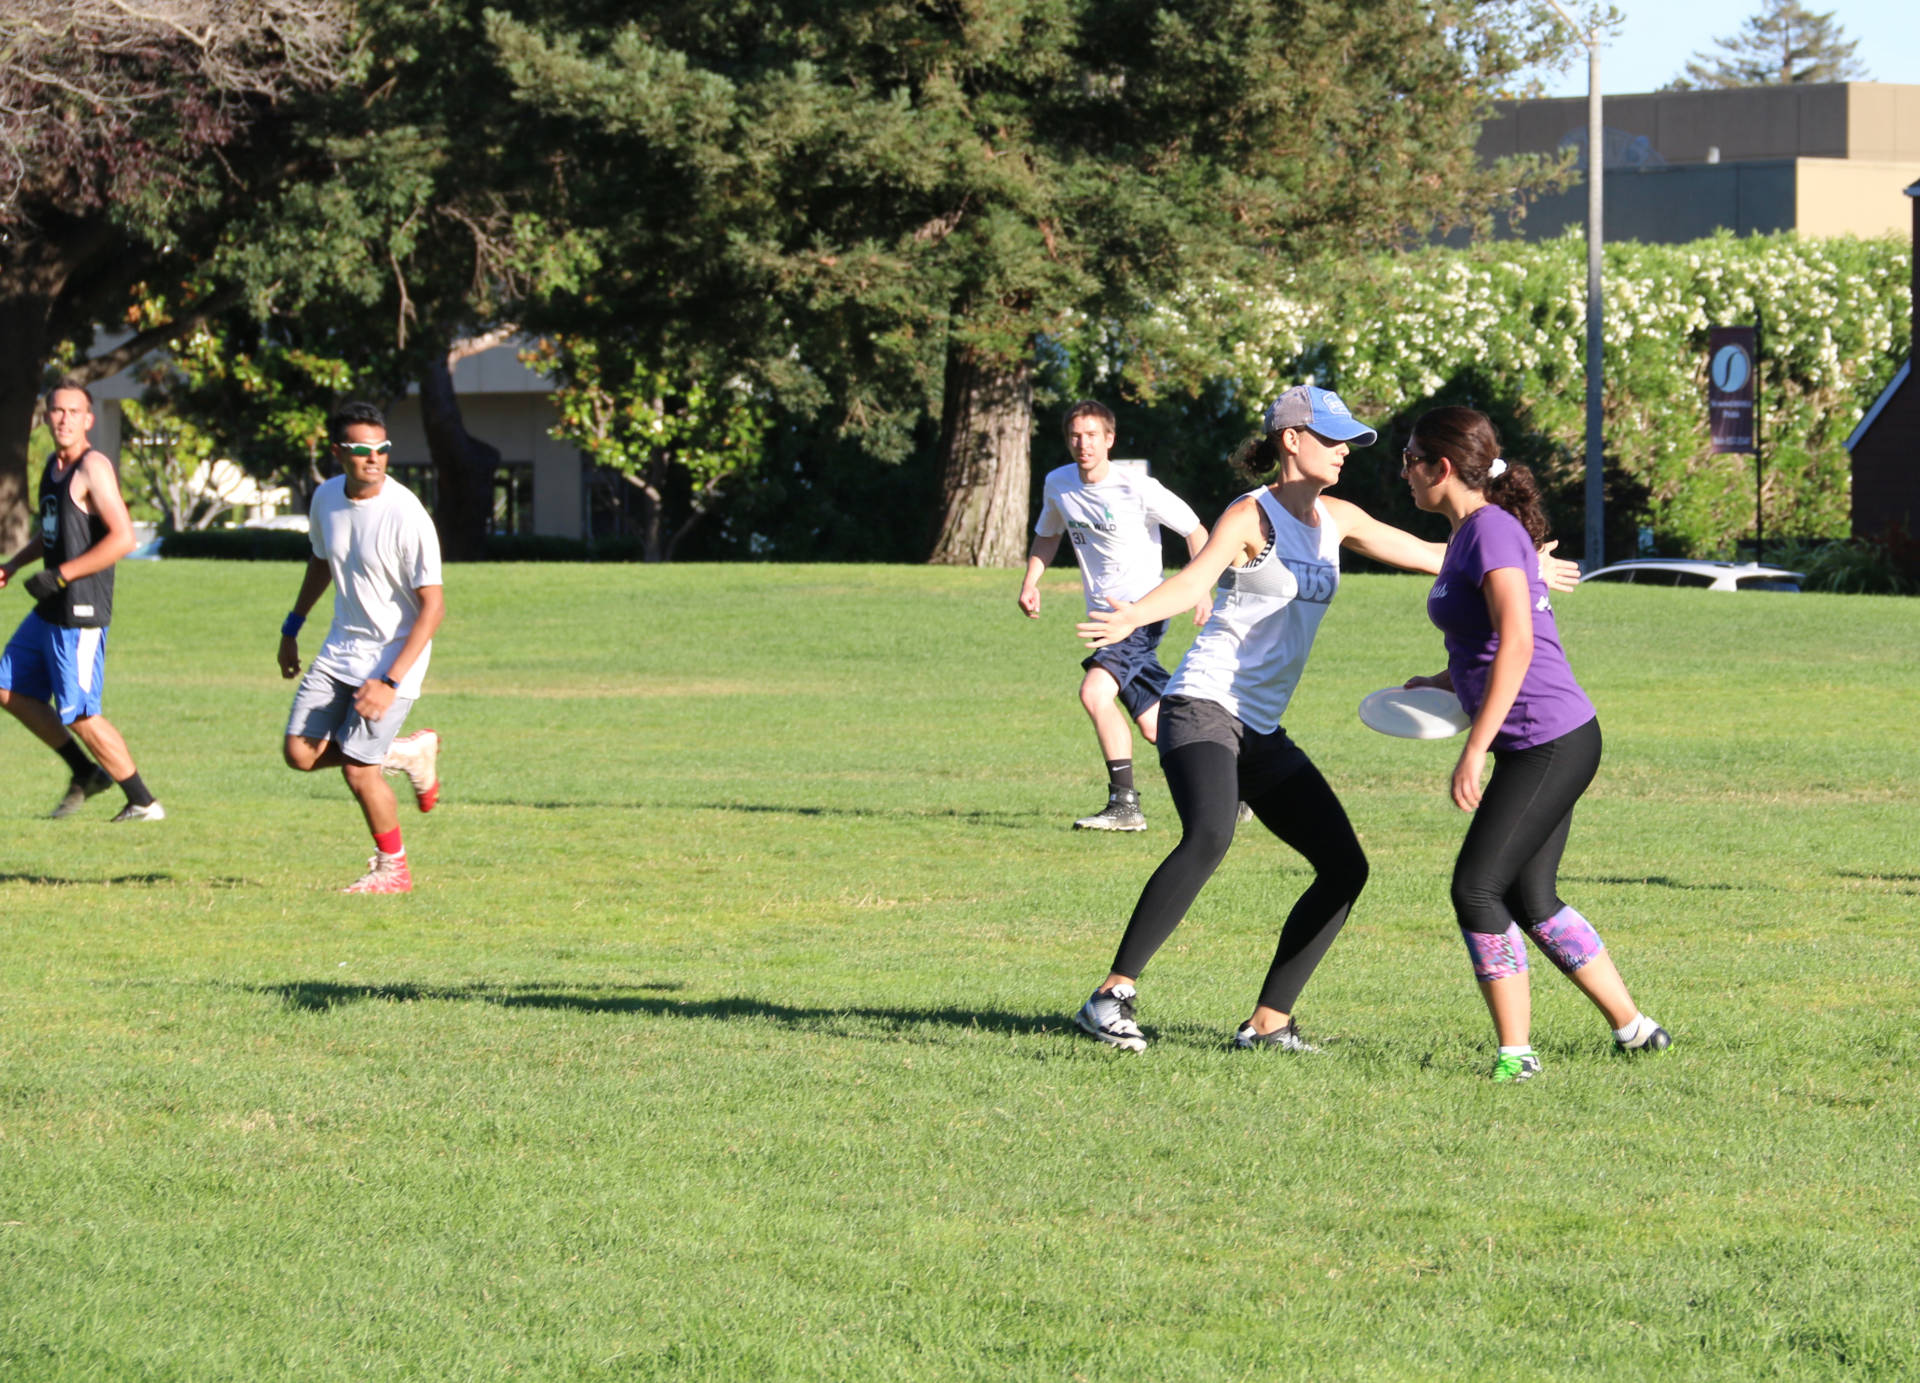 Afifa Tawil is an organizer of pickup ultimate games in the South Bay. Here she eyes opportunities to pass the Frisbee.  Olivia Allen-Price/KQED